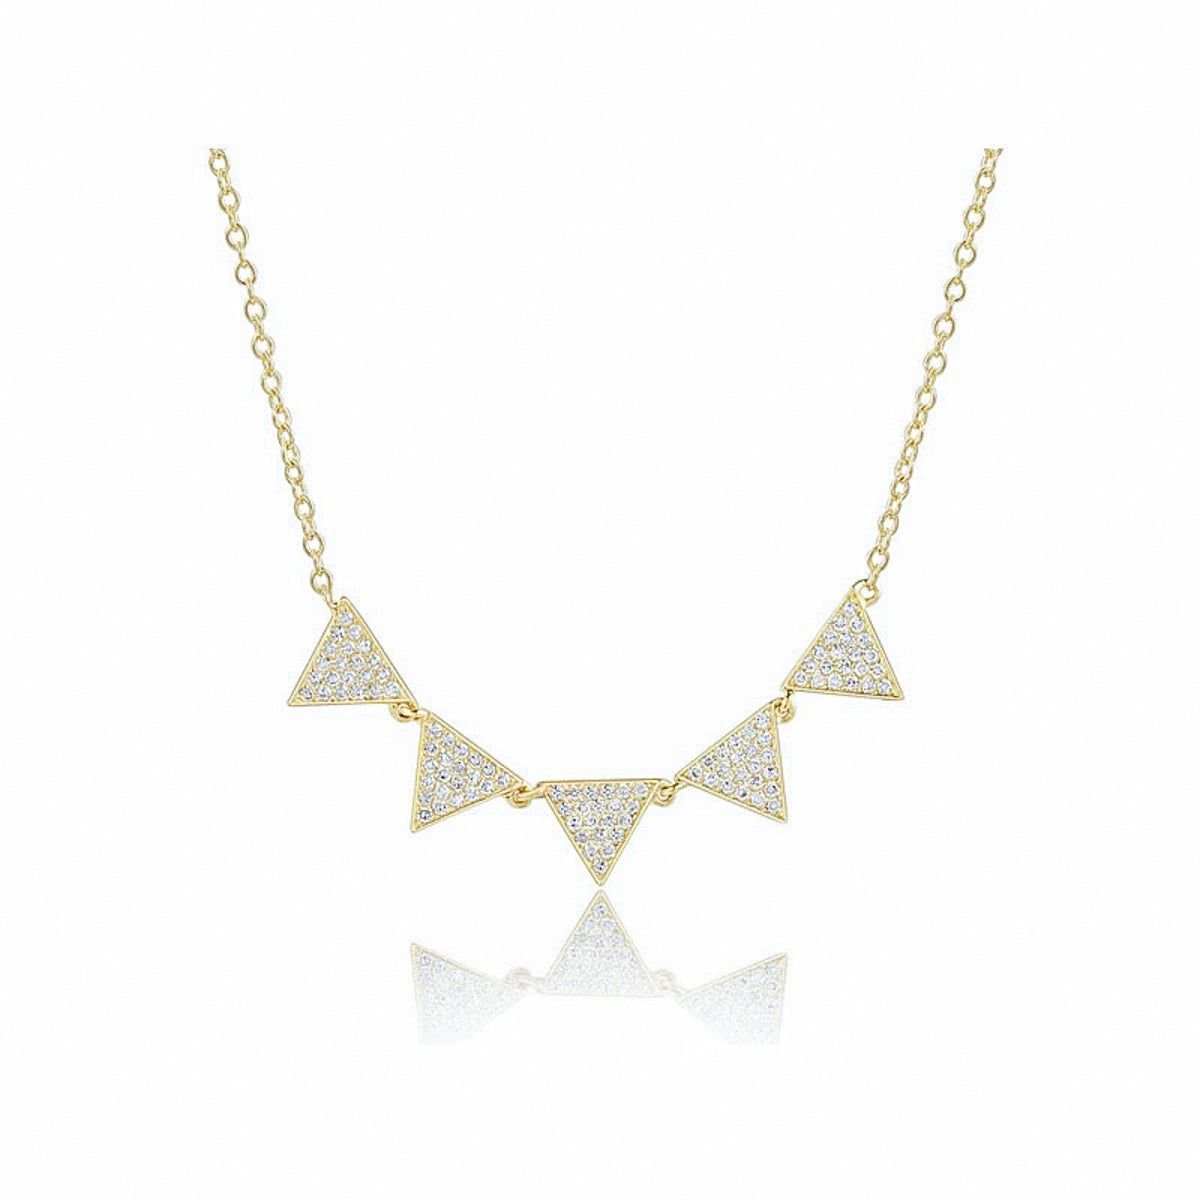 Five Triangle Pave Necklace